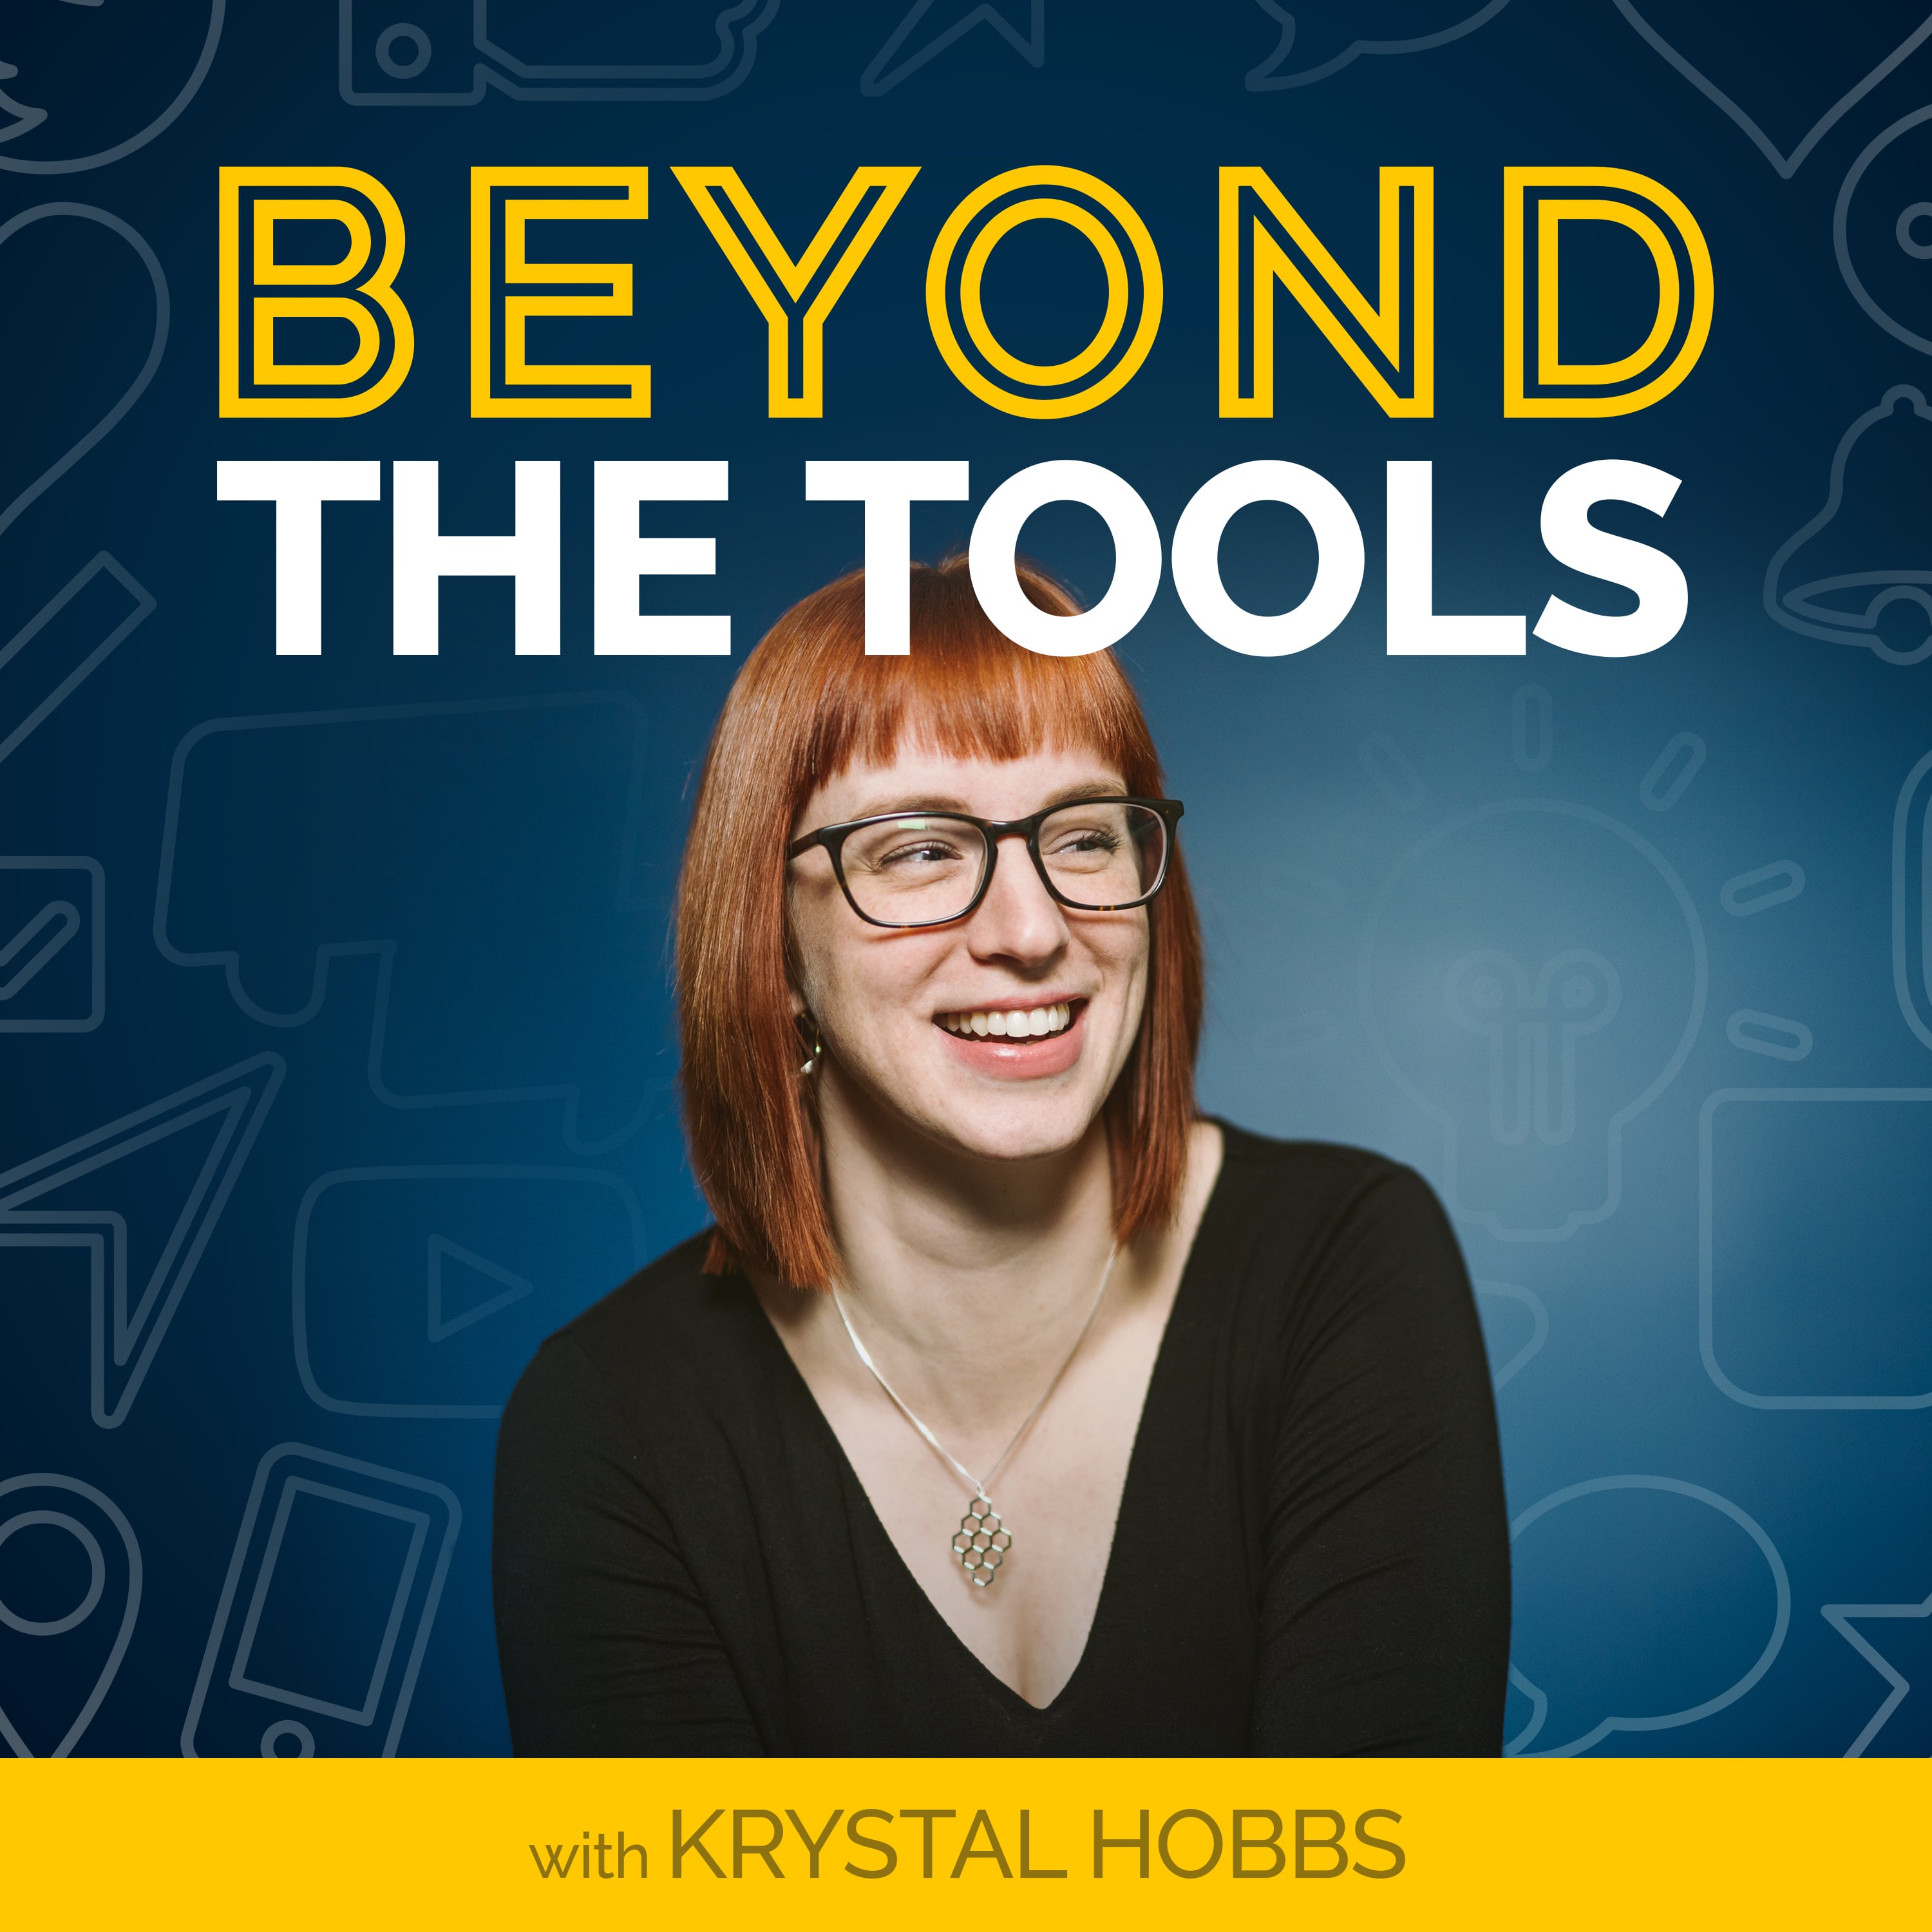 Artwork for podcast Beyond The Tools